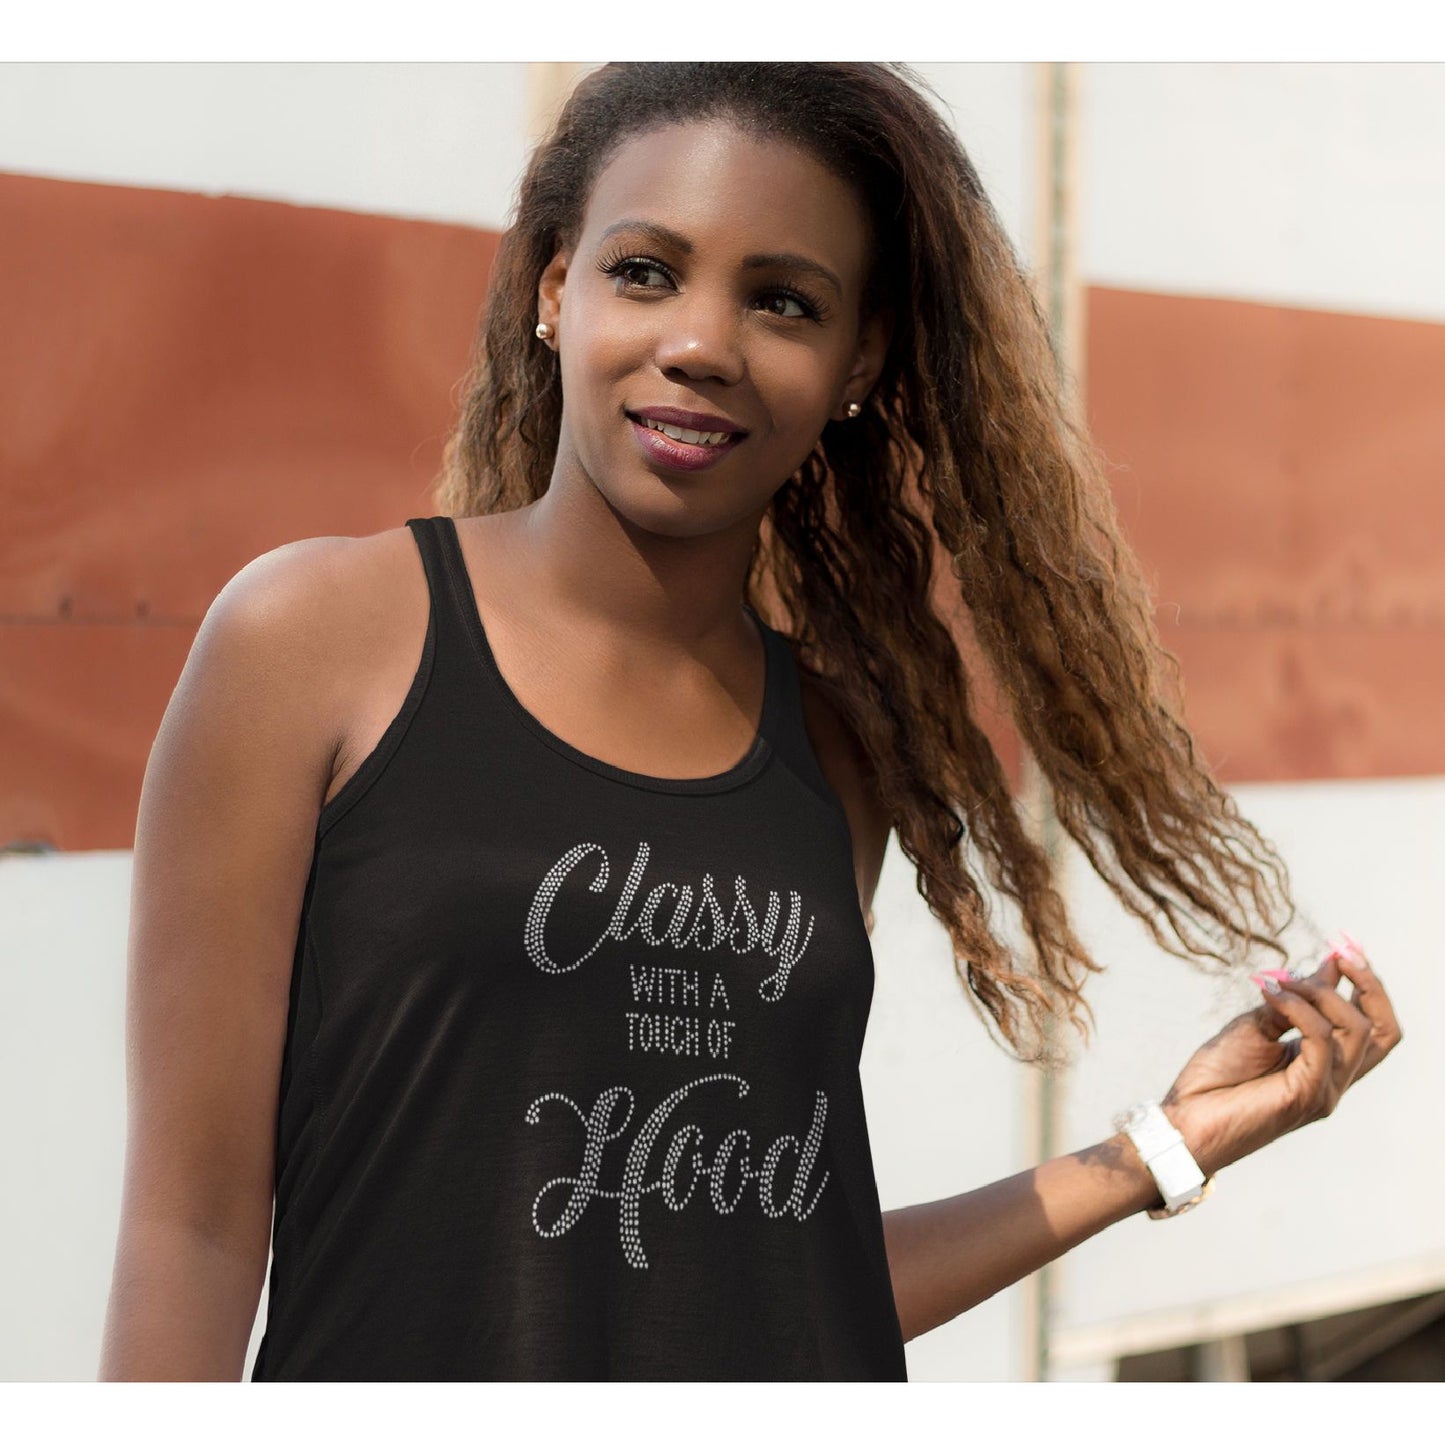 Classy With A Touch of Hood Tank Top